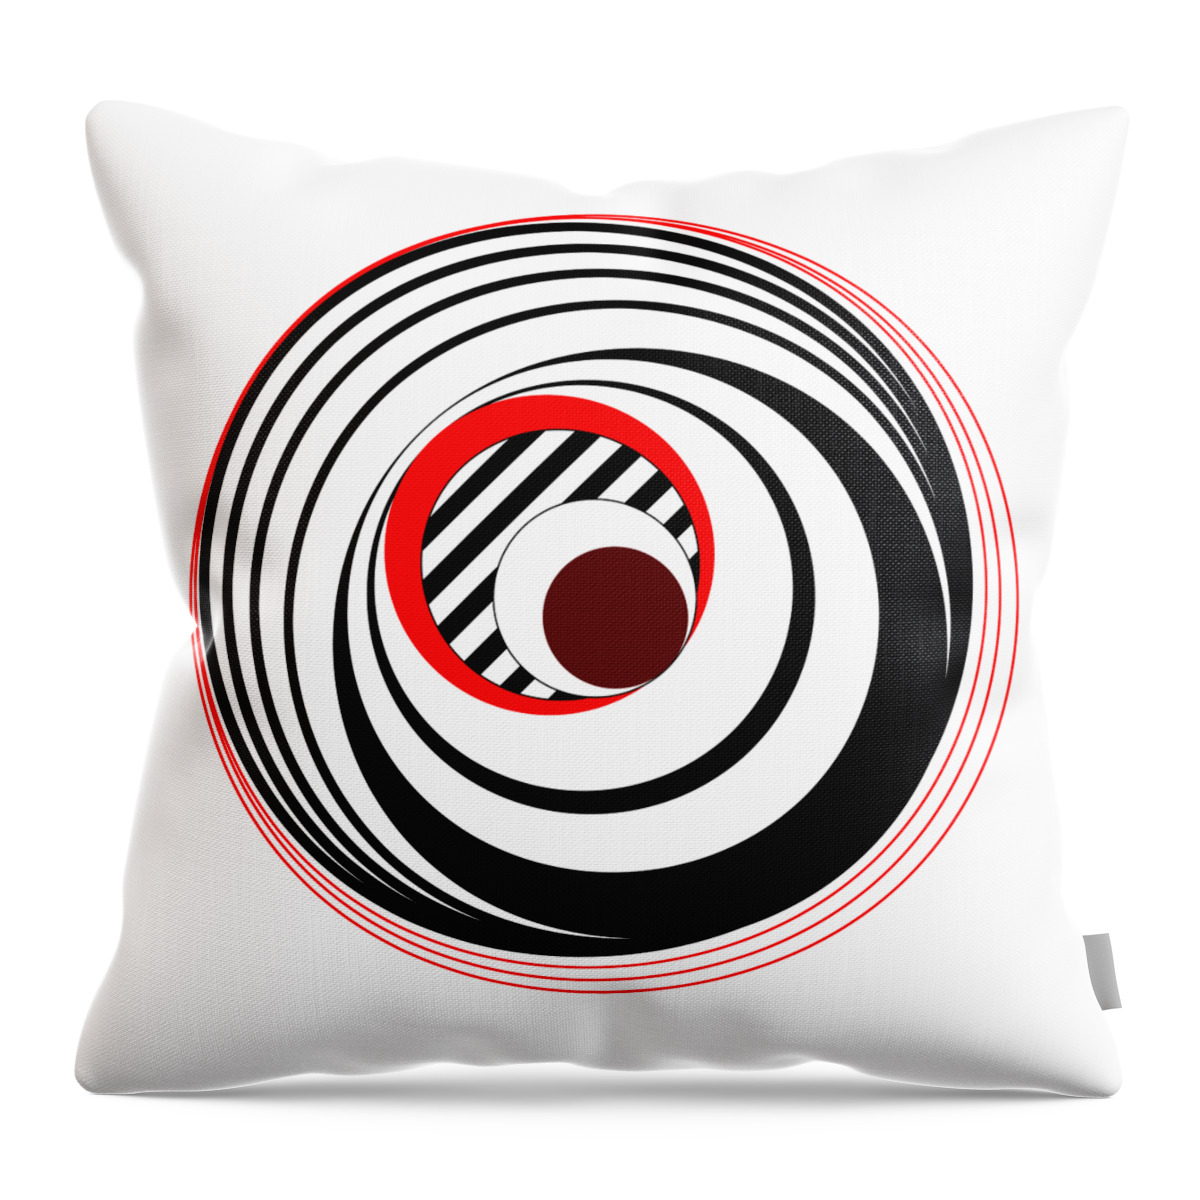 Funky Throw Pillow featuring the digital art Fallon by Linda Lees